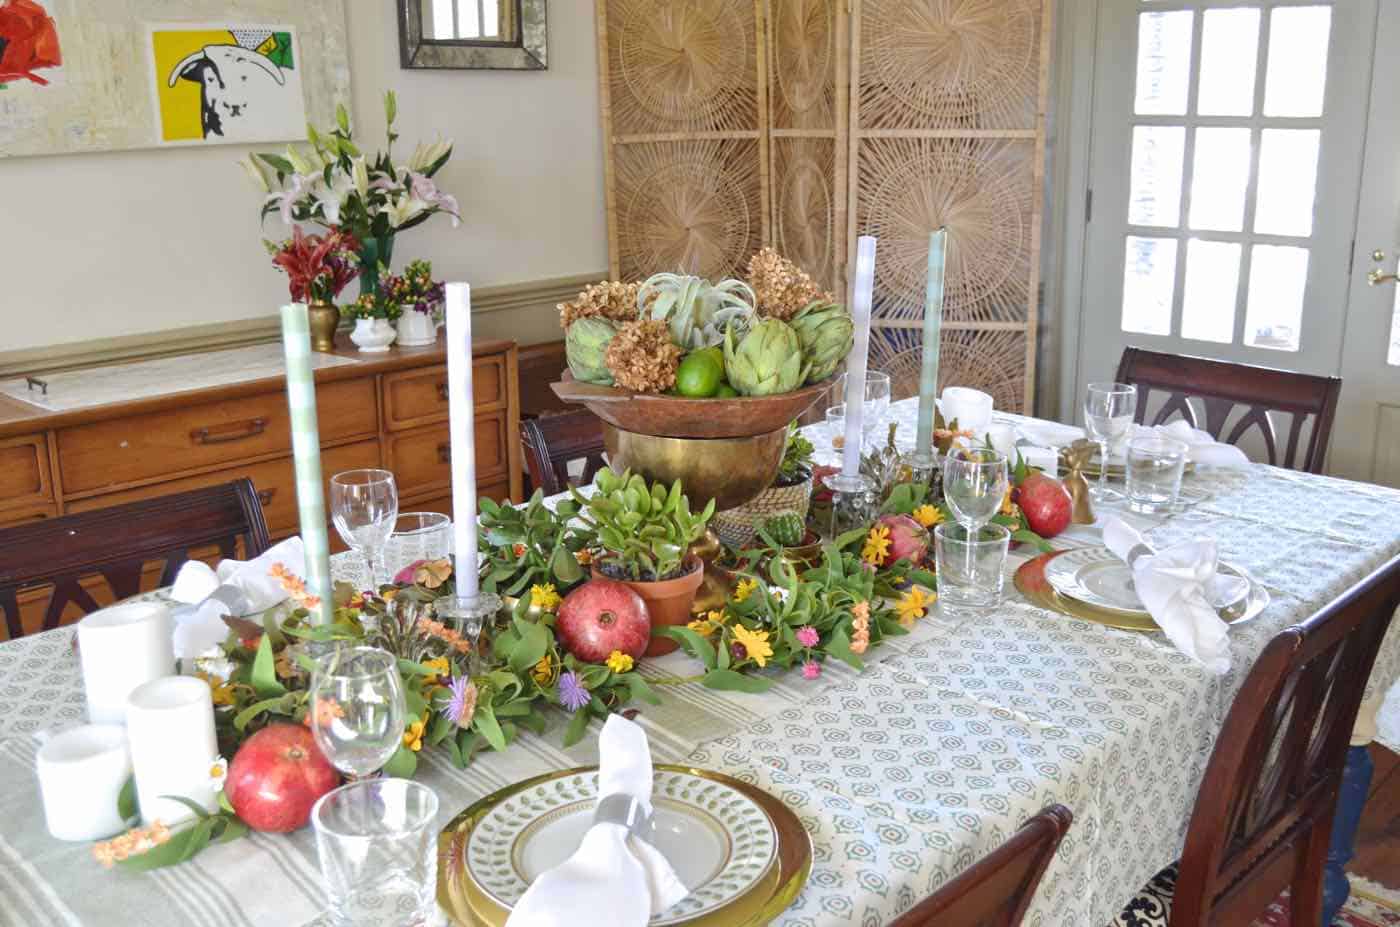 Thanksgiving tablescape with lush greenery and vegetables.